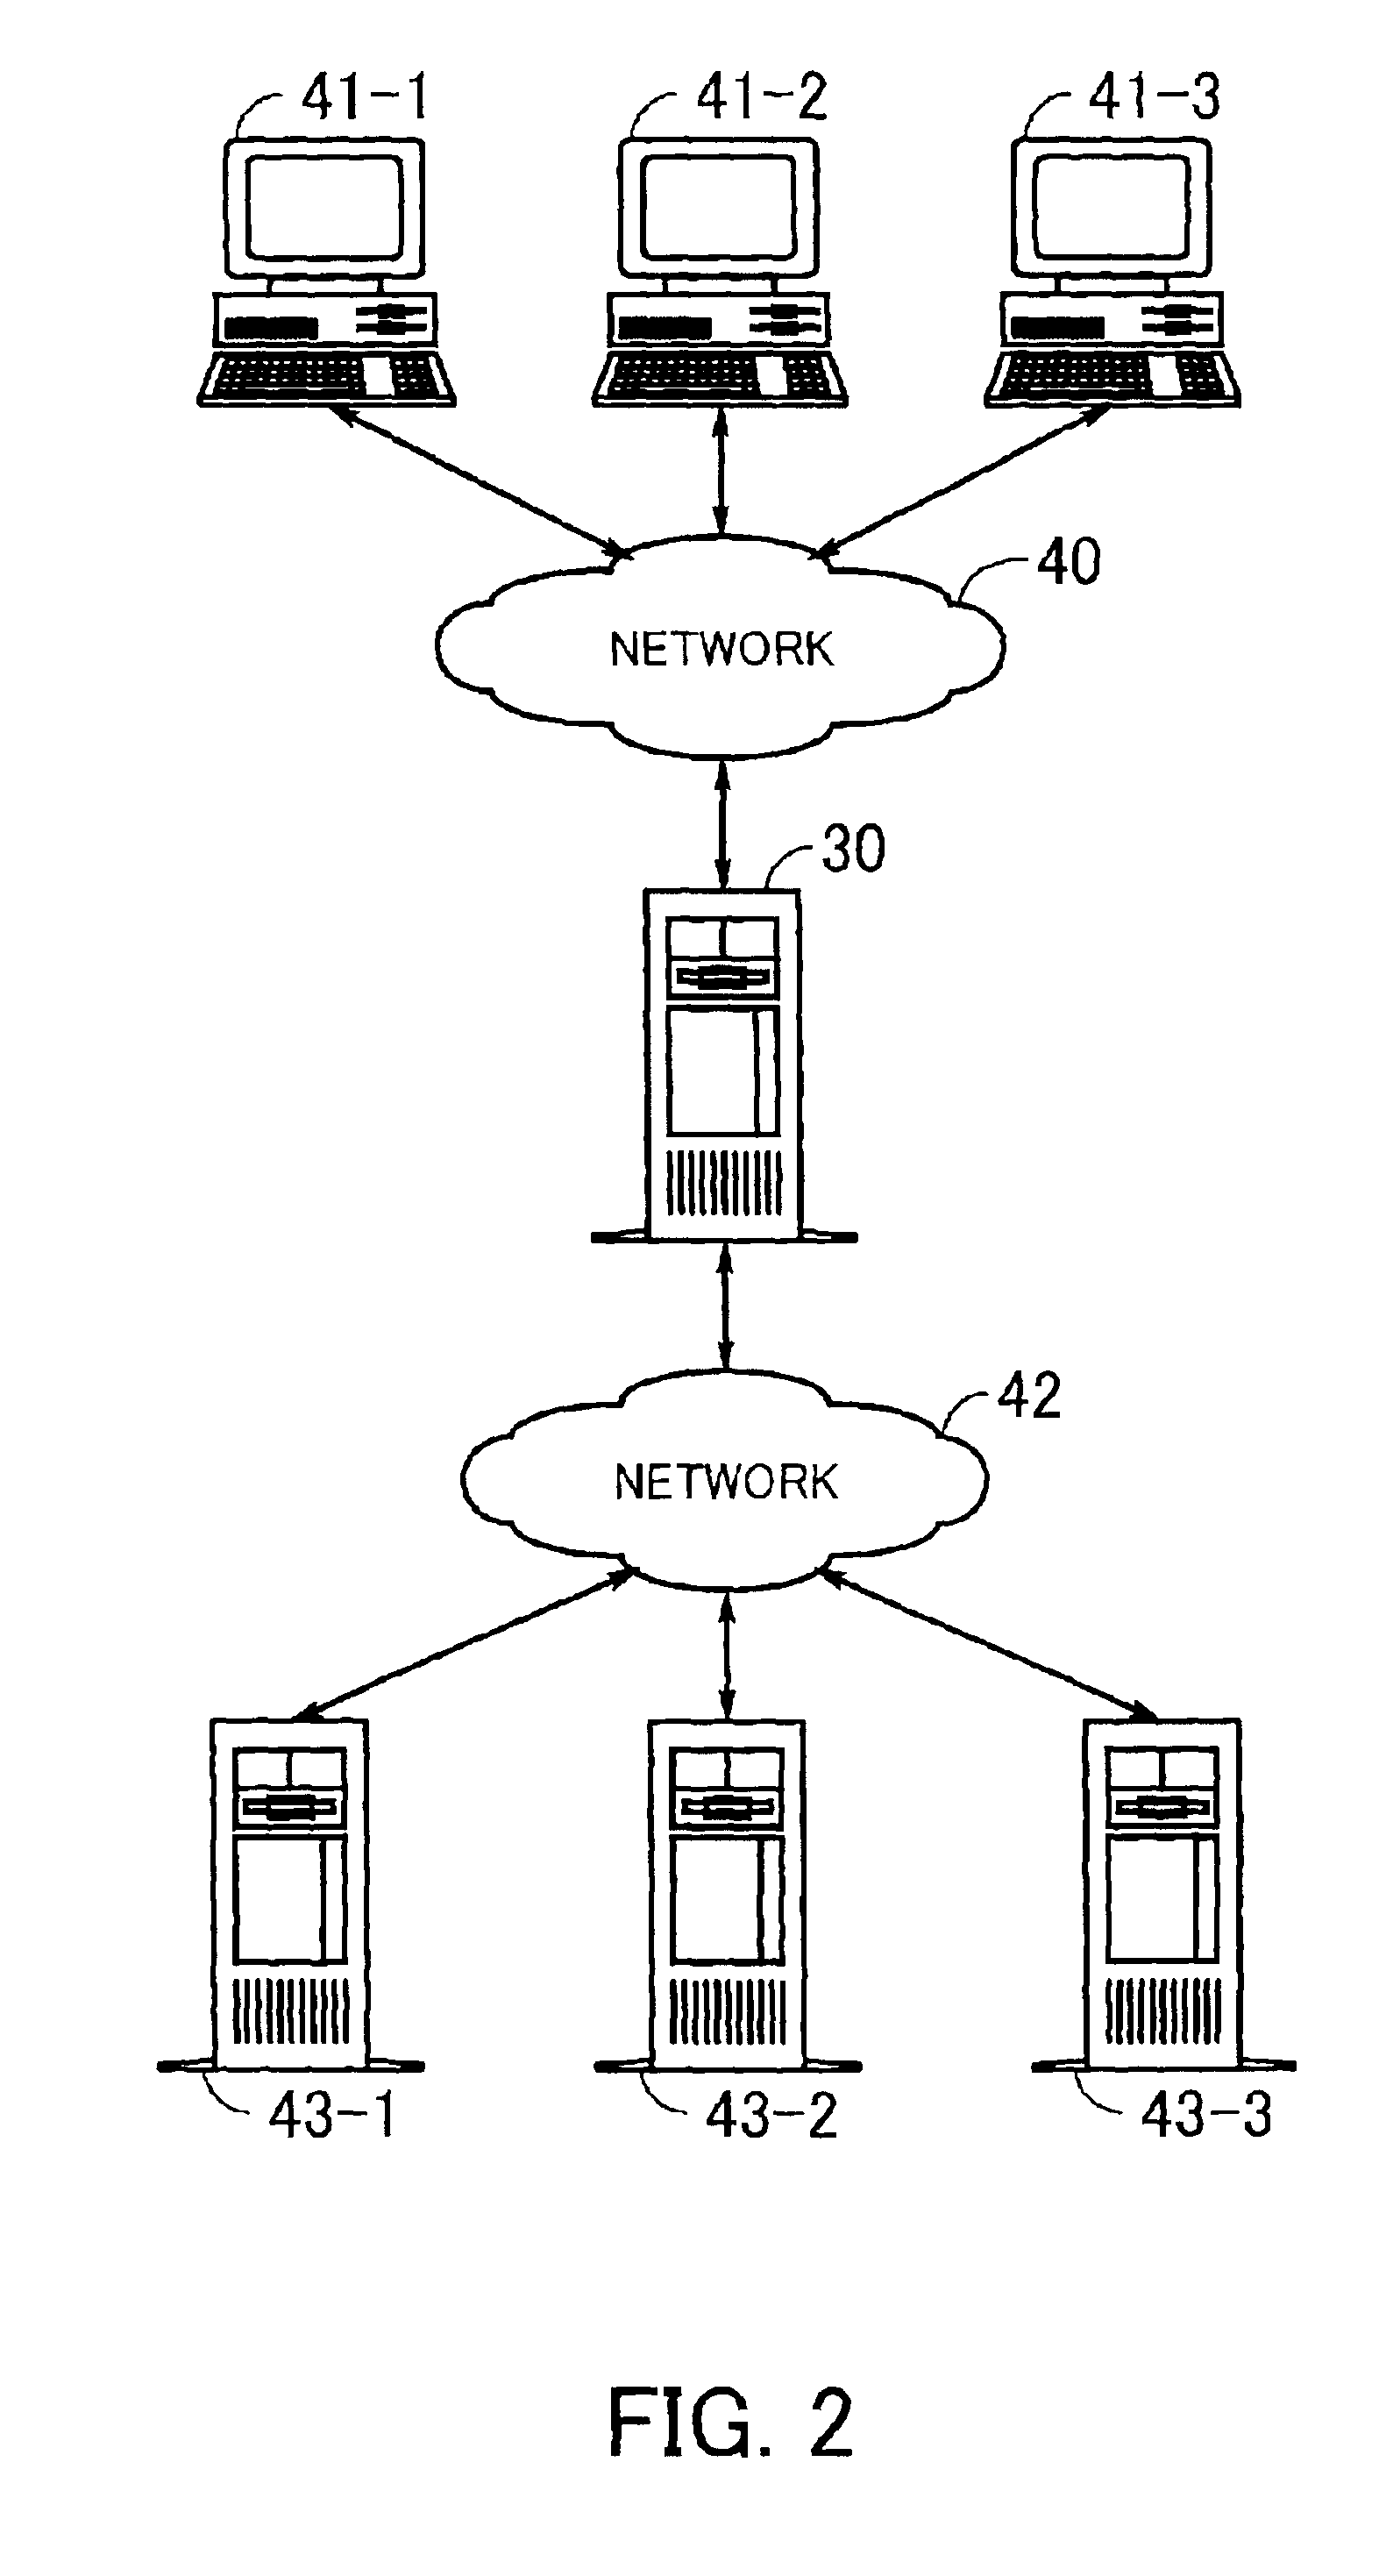 User's right information and keywords input based search query generating means method and apparatus for searching a file